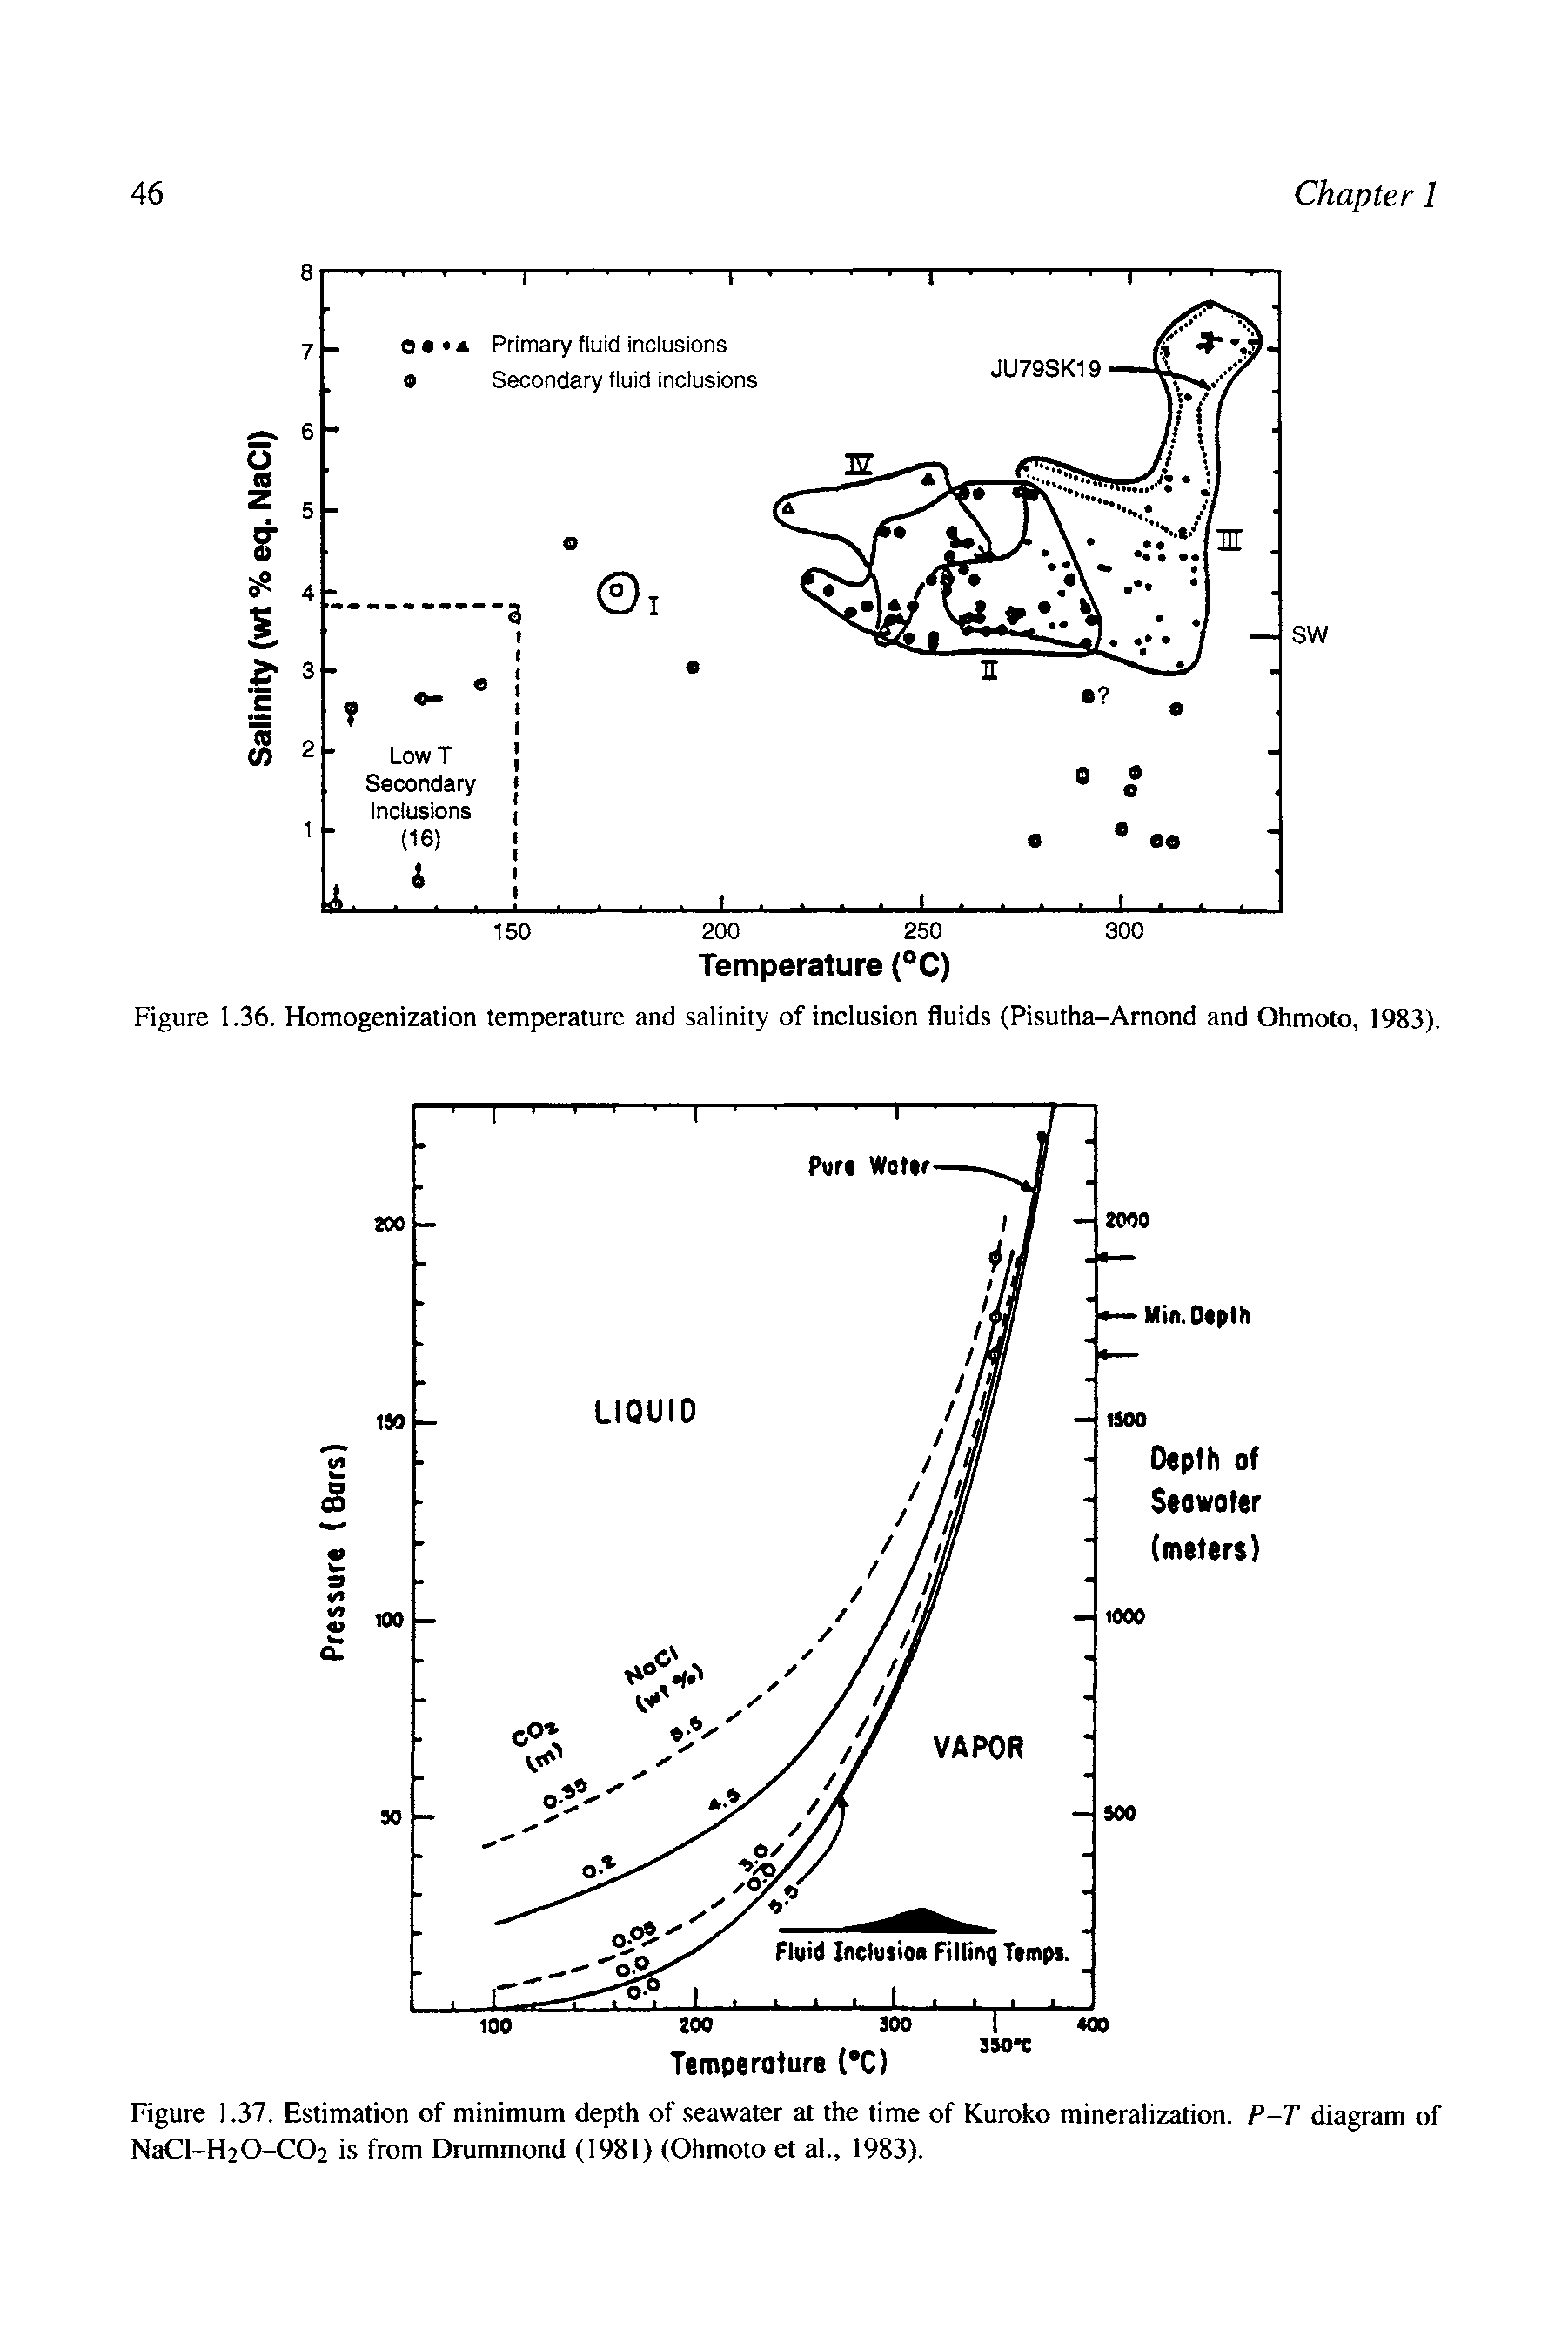 Figure 1.37. Estimation of minimum depth of seawater at the time of Kuroko mineralization. P-T diagram of NaCl-H20-C02 is from Drummond (1981) (Ohmoto et al., 1983).